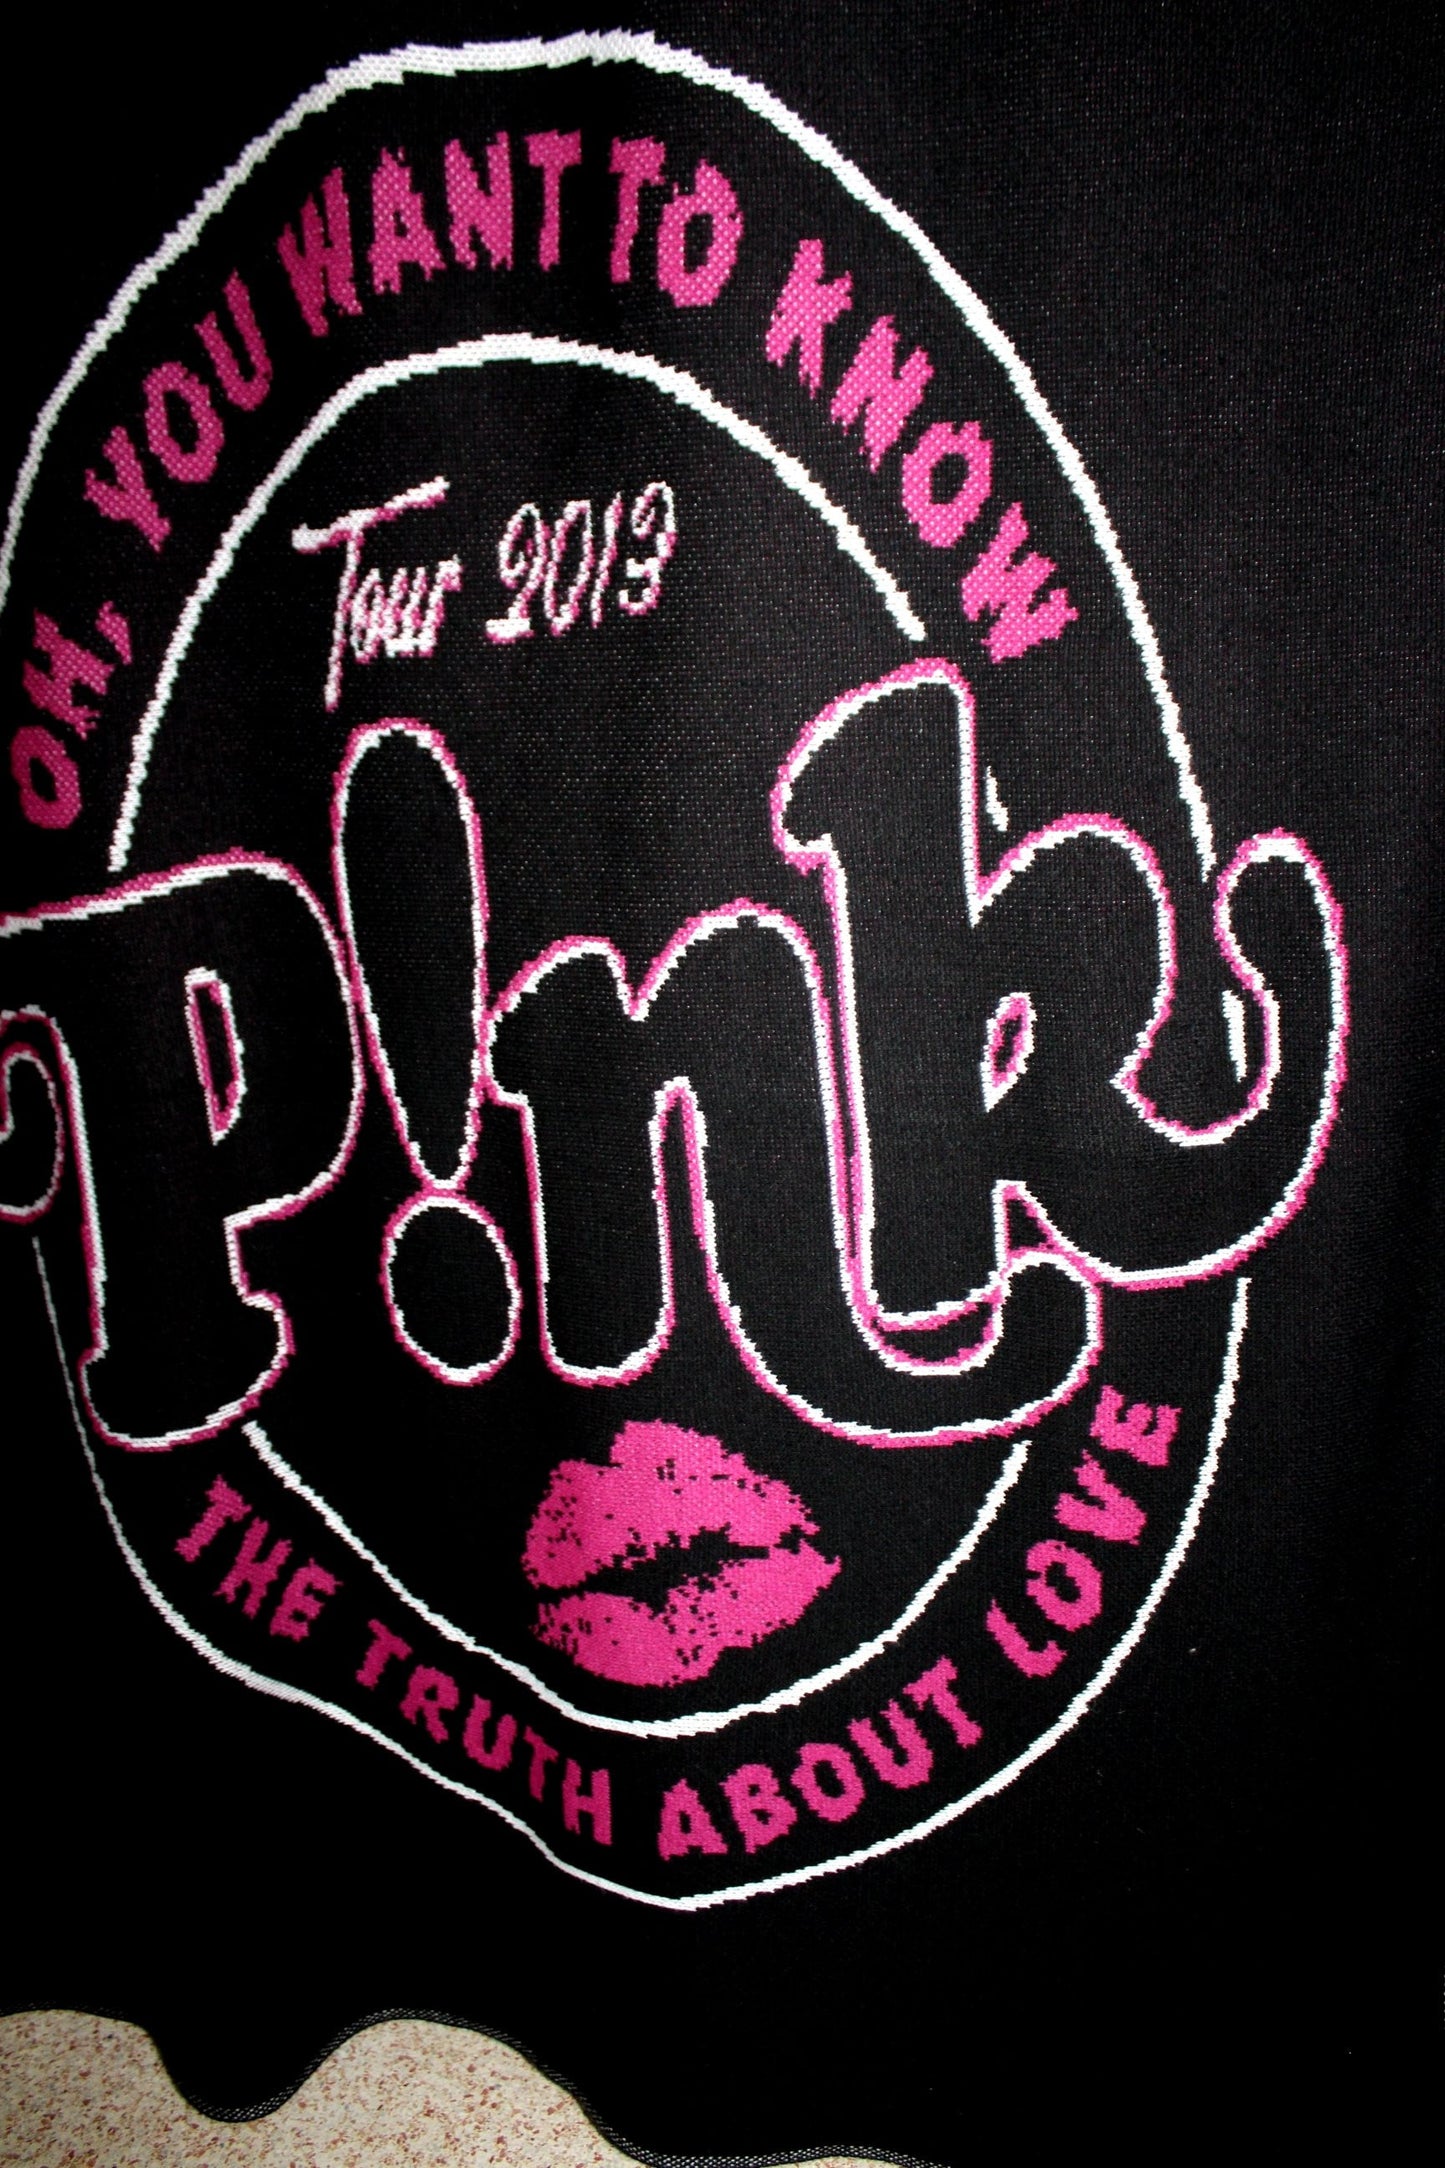 USA Acrylic Throw - "Pink" 2013 Tour ~ Black Sweater Knit - 49" X 64" truth about love